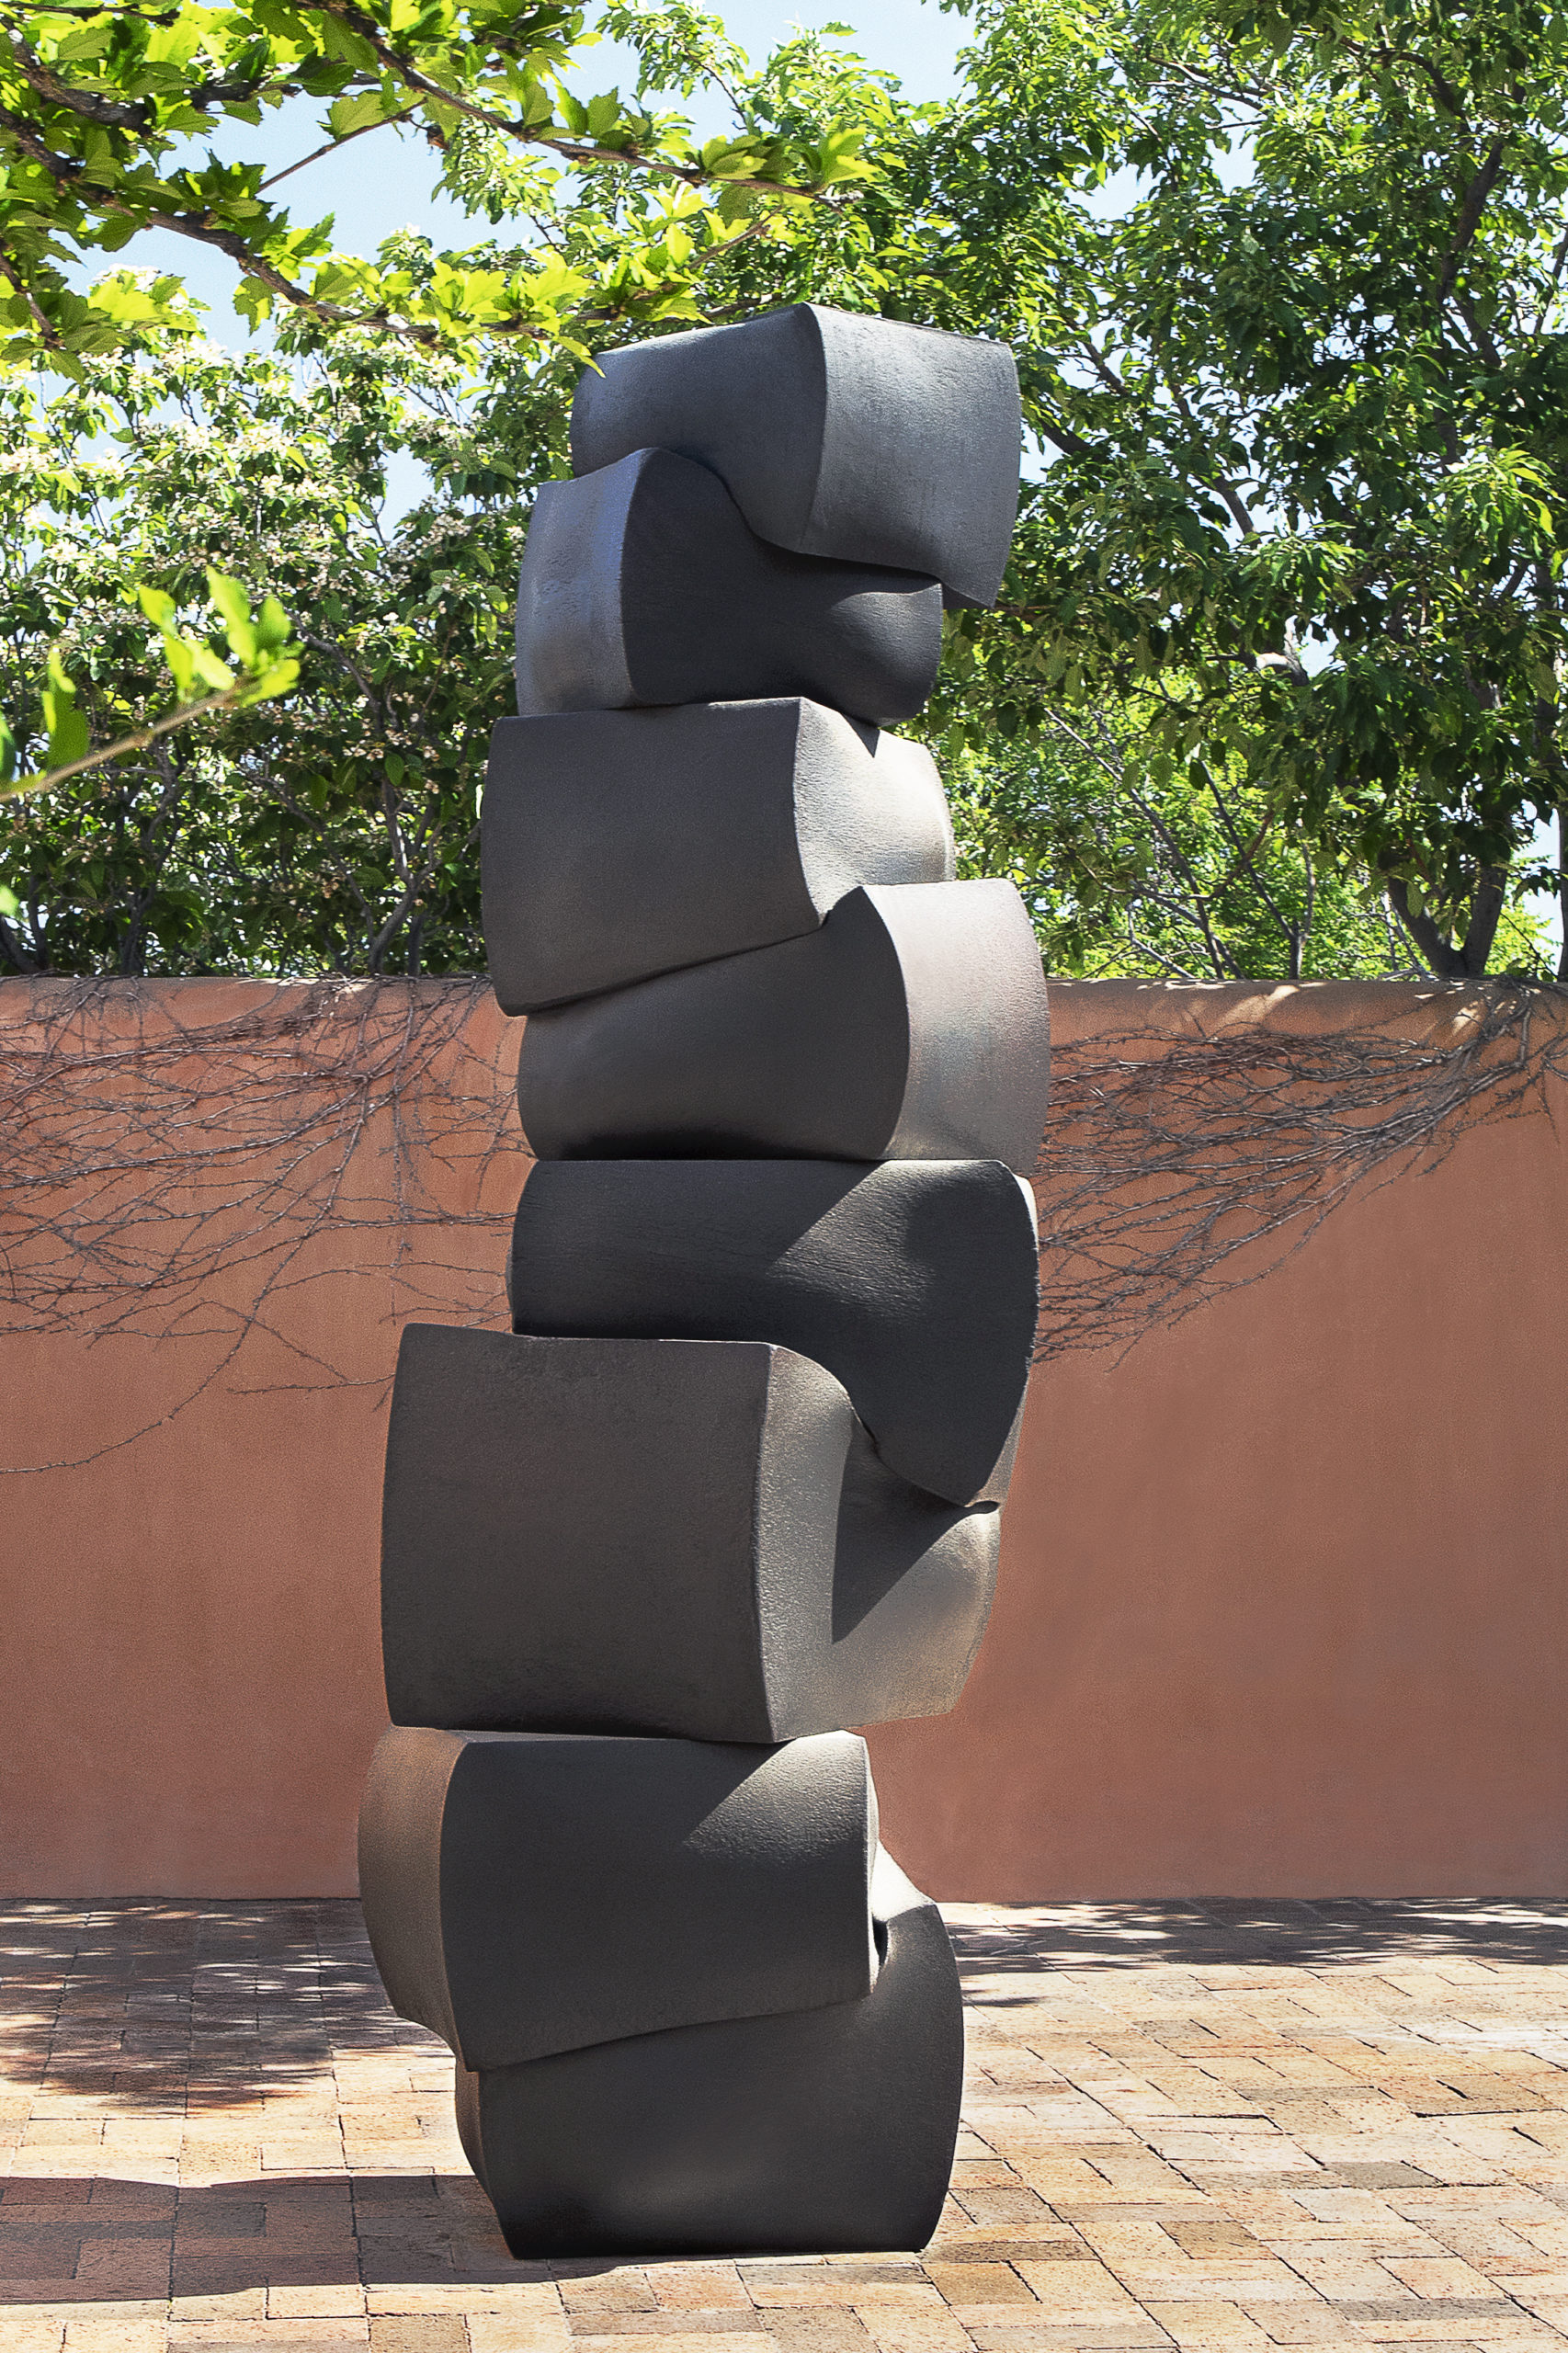 
		                					Tom Joyce		                																	
																											<i>Stack III,</i>  
																																								2008, 
																																								forged stainless steel, 
																																								84 x 33 x 32 inches 
																								
		                				